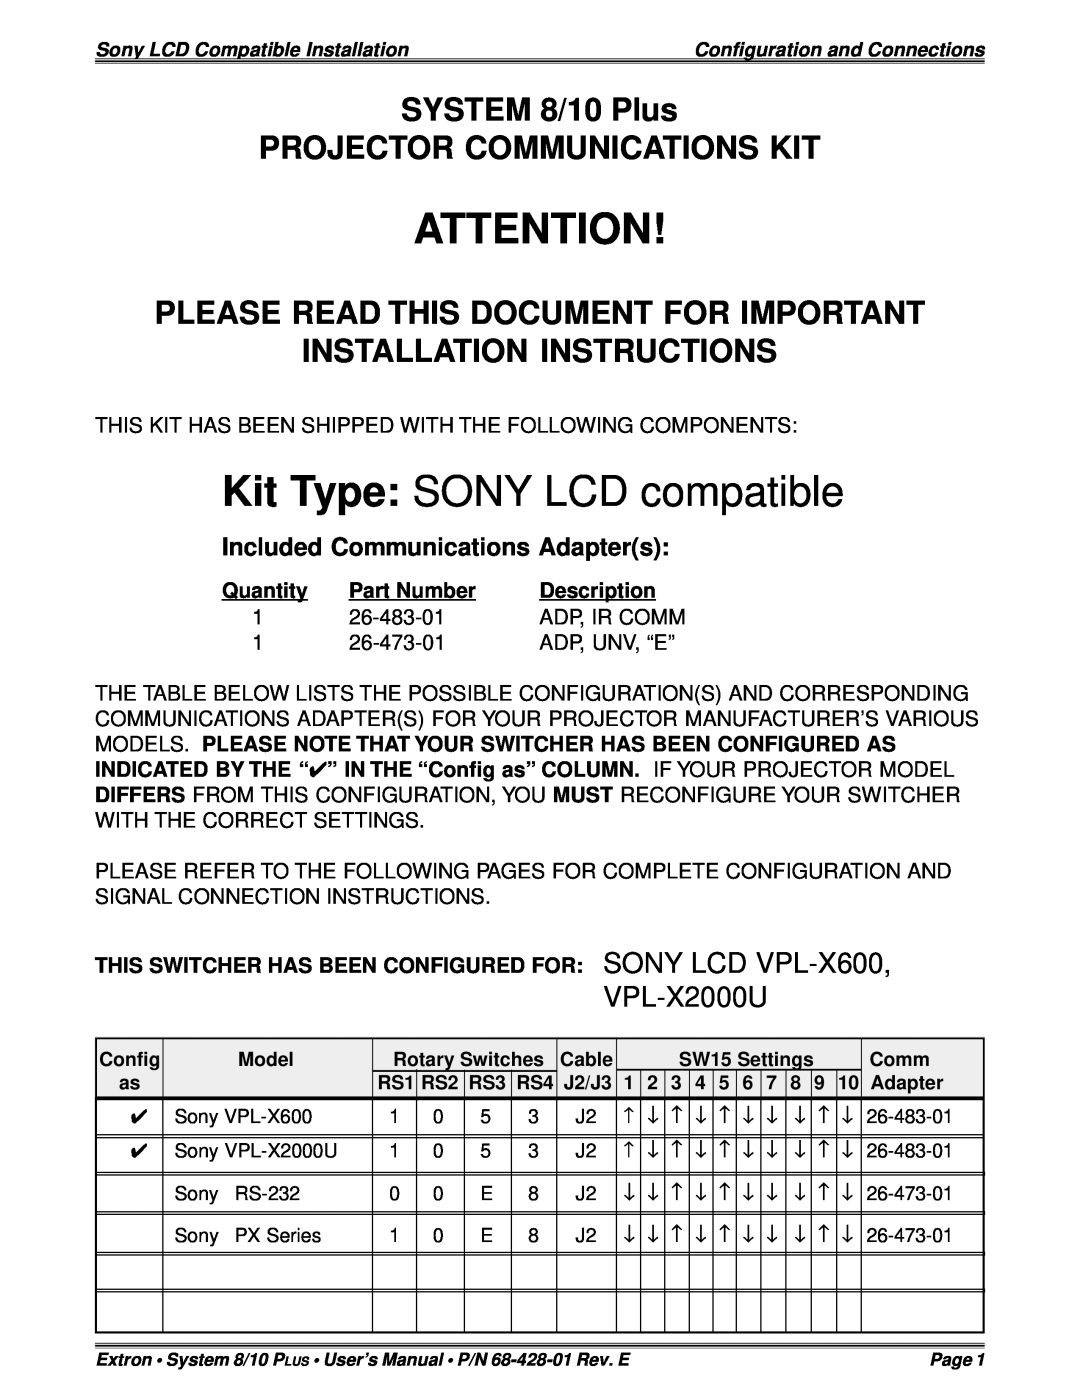 Sony 26-473-01 installation instructions Quantity, Part Number, Description, Kit Type SONY LCD compatible, SONY VPL-X2000U 